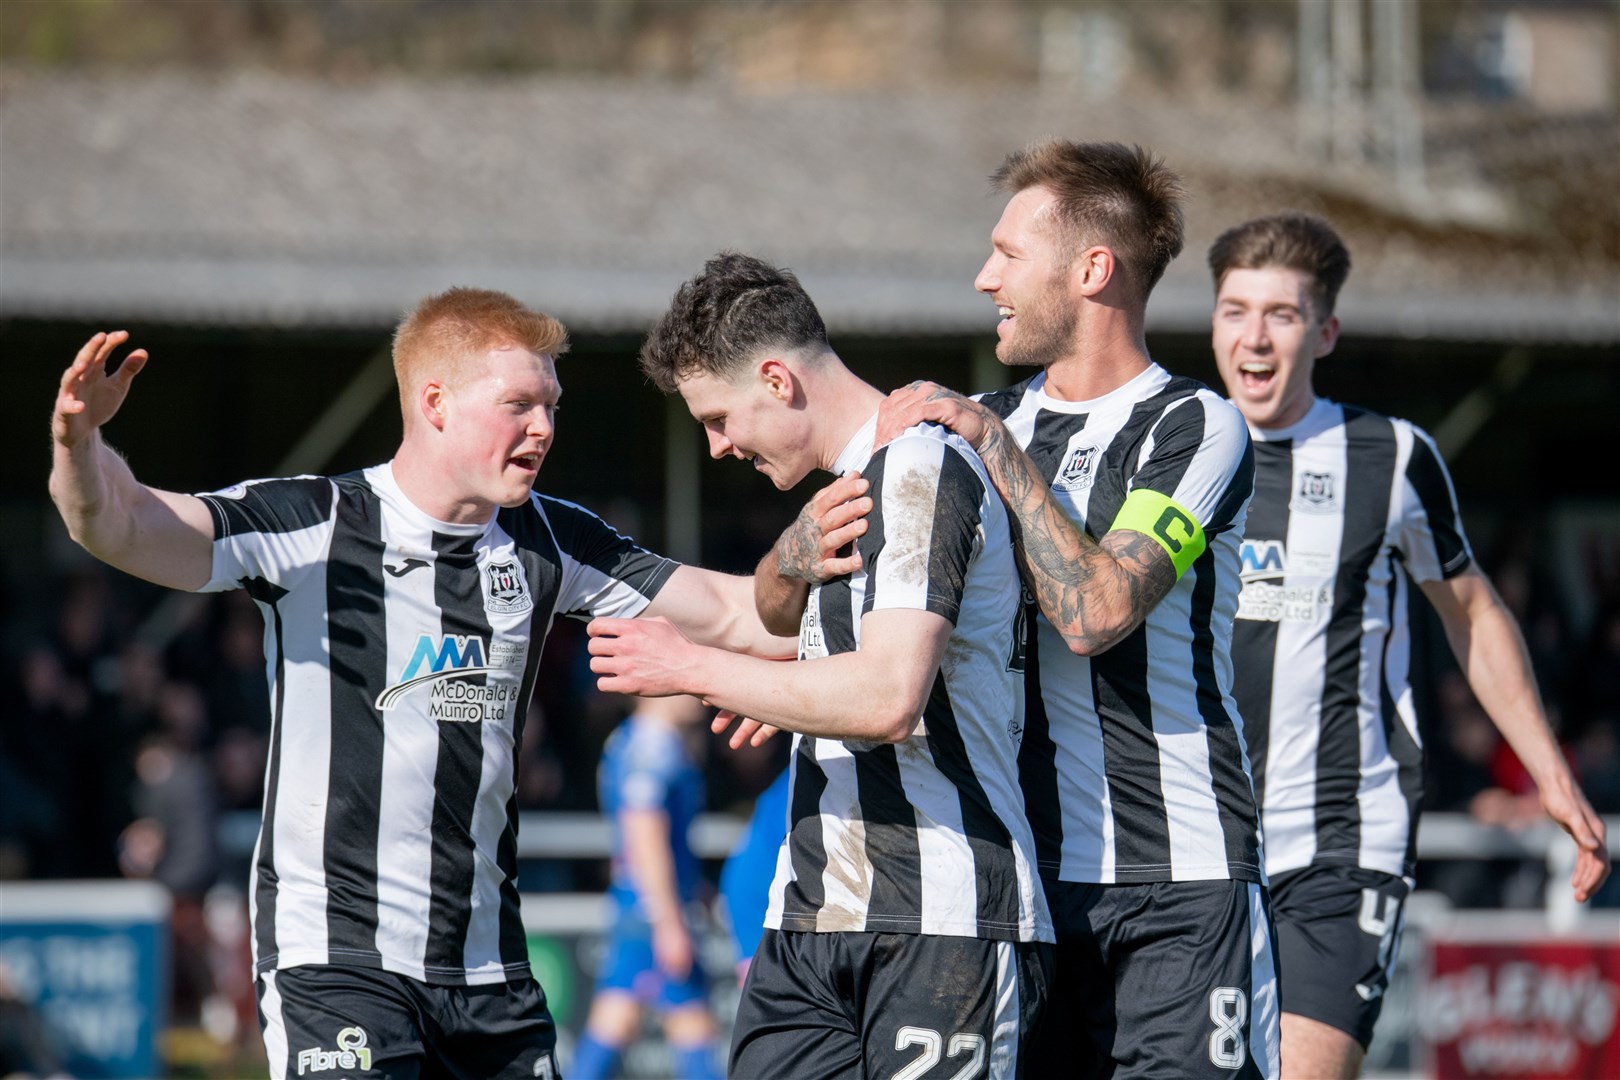 Ryan Macleman puts Elgin ahead with a great second half strike. Elgin City FC (2) vs The Spartans (2) - SPFL League Two 23/24 - Borough Briggs, Elgin 06/04/24.Picture: Daniel Forsyth.